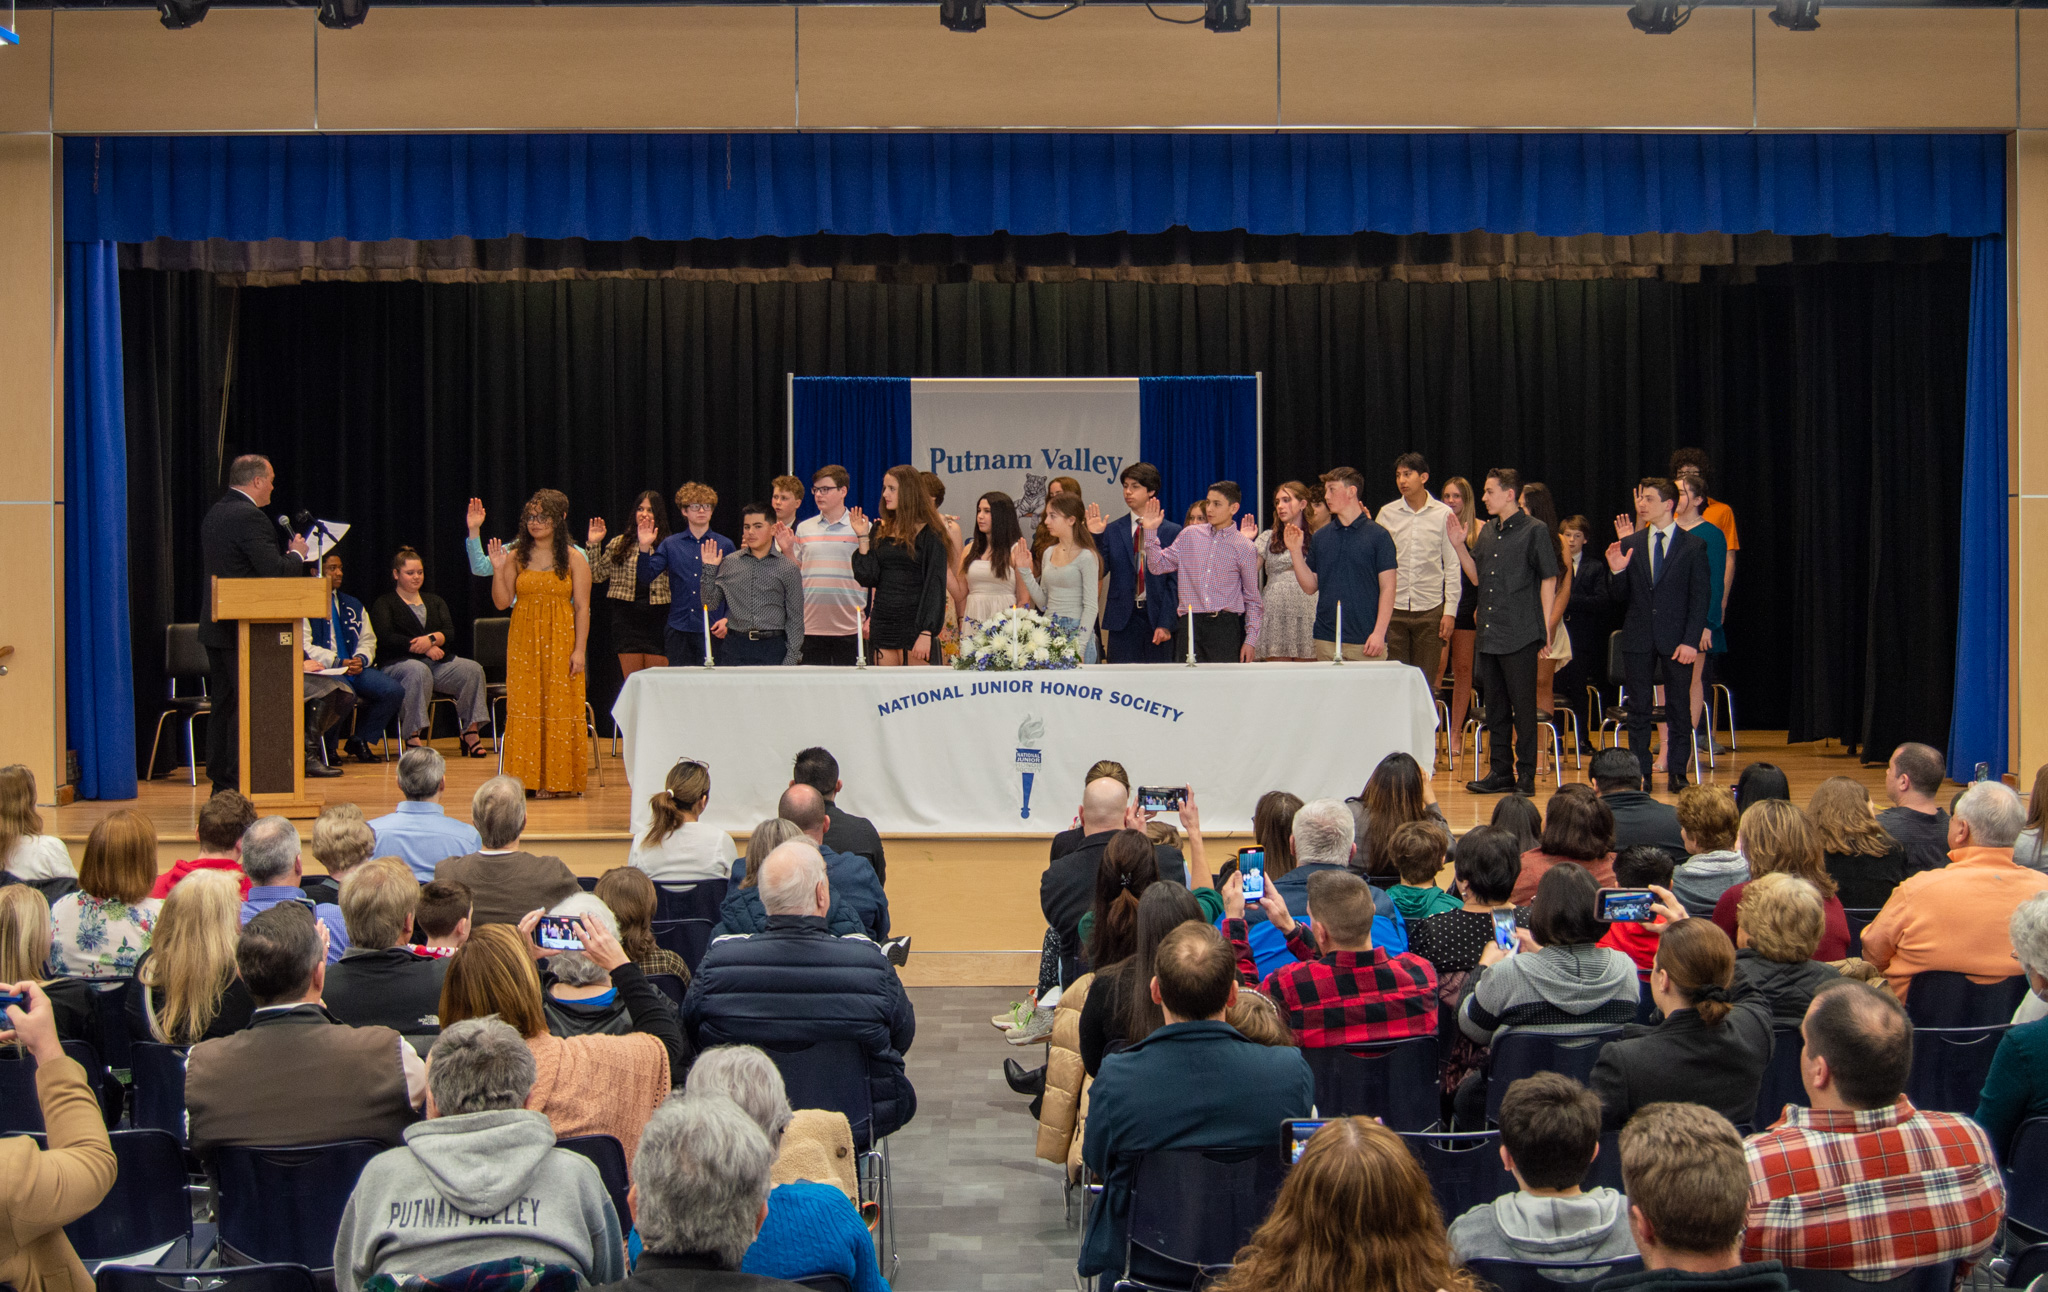 Congratulations to our 26 new members of the National Junior Honor Society.  We are proud of you all!